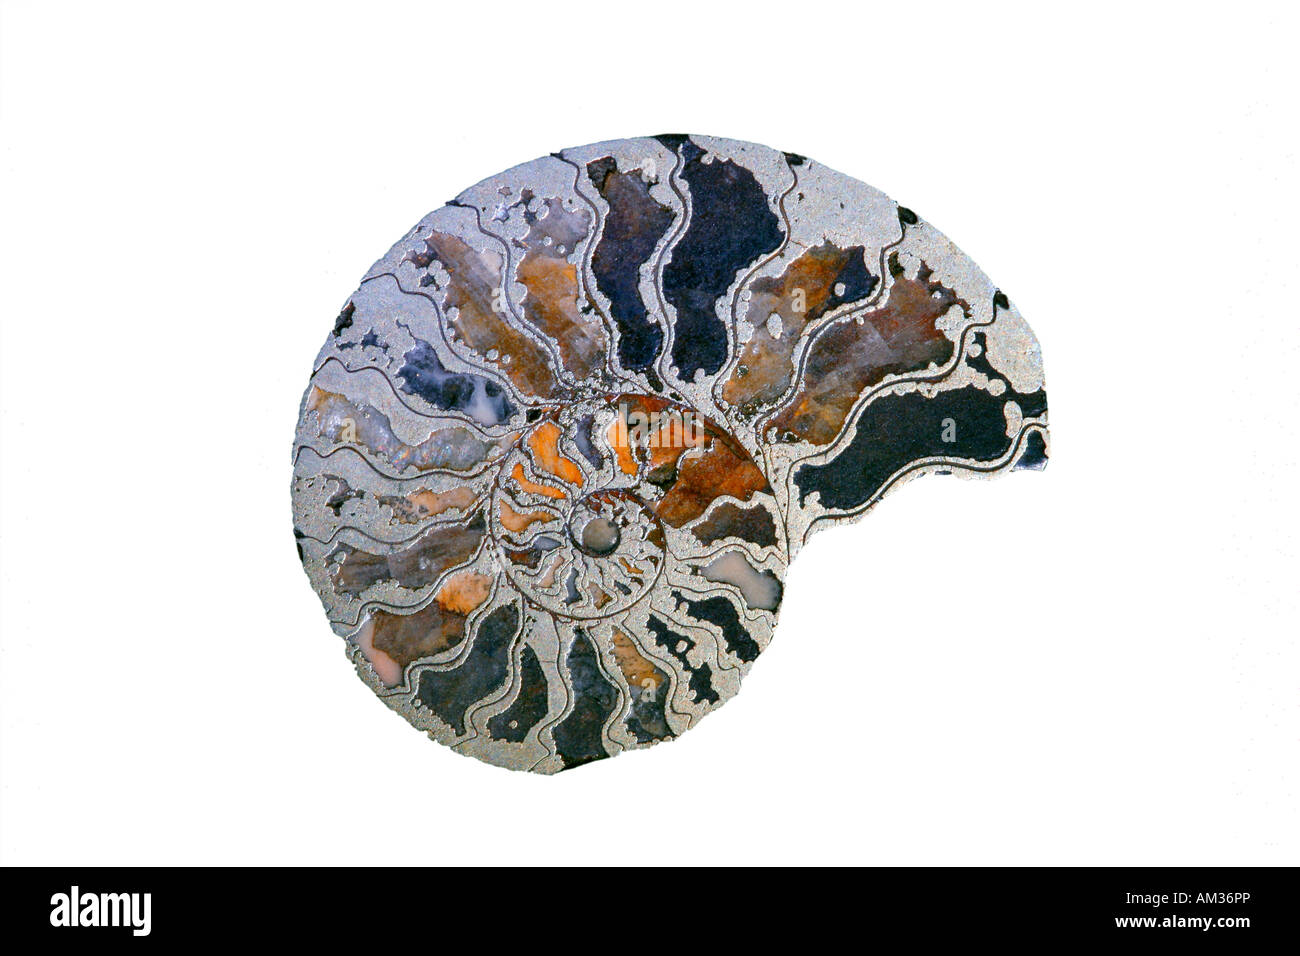 Fossil, ammonite, cross section, cut out Stock Photo